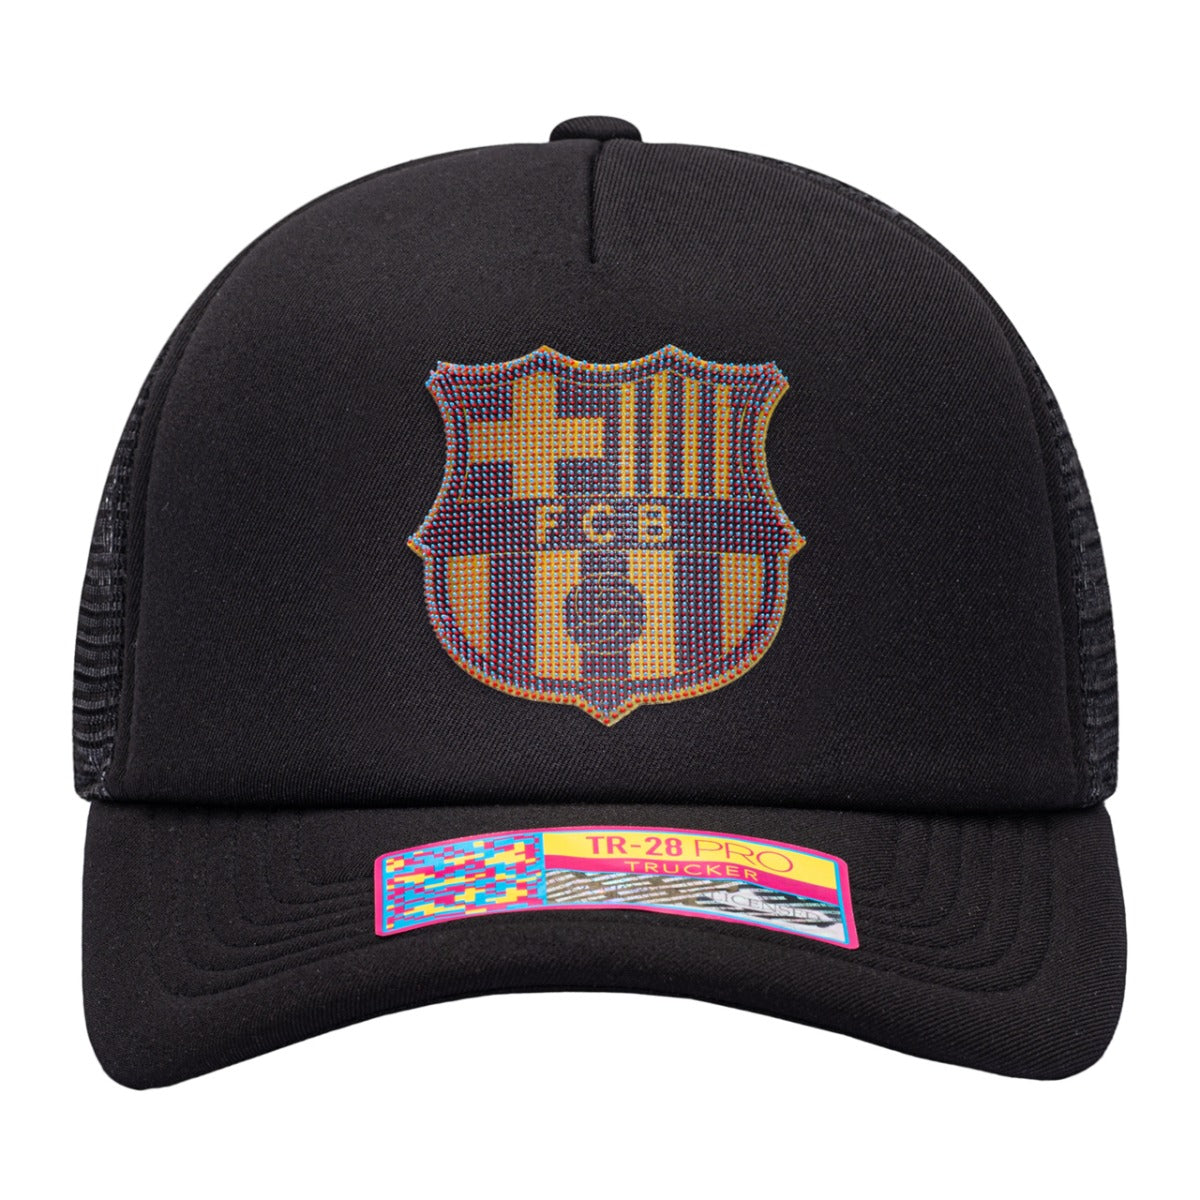 FI Collection Barcelona Shield Trucker Hat - Black (Front)